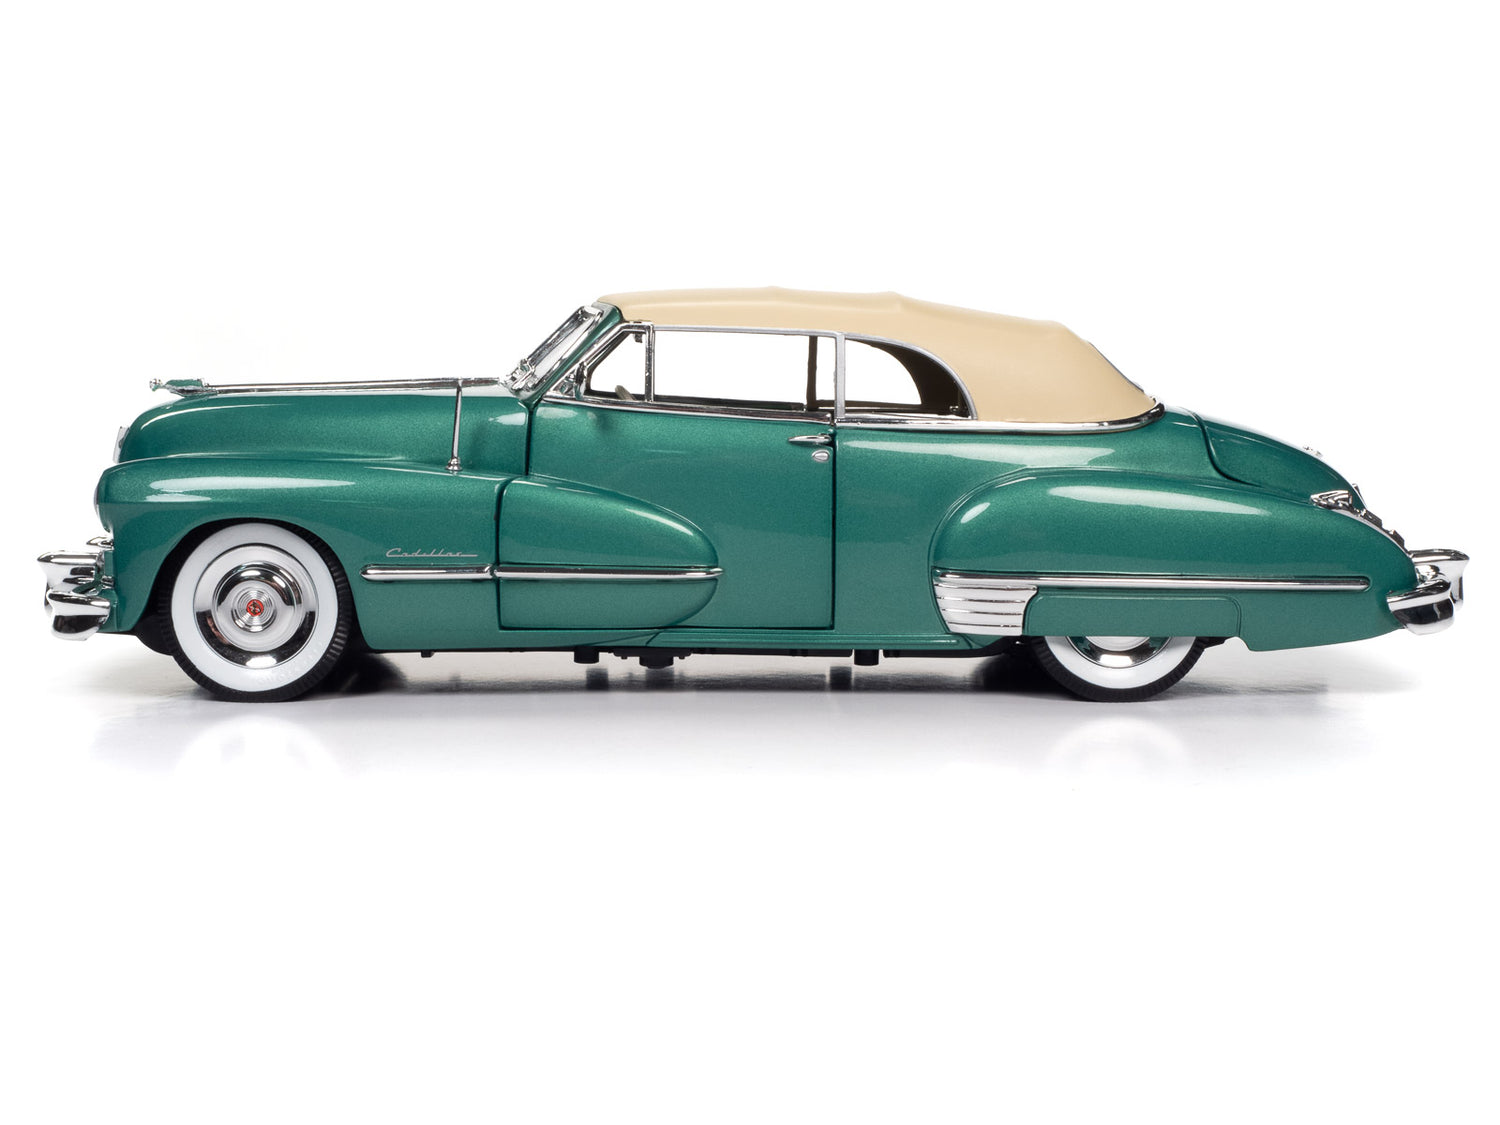 Auto World 1947 Cadillac Series 62 Cabriolet 1:18 Scale Diecast